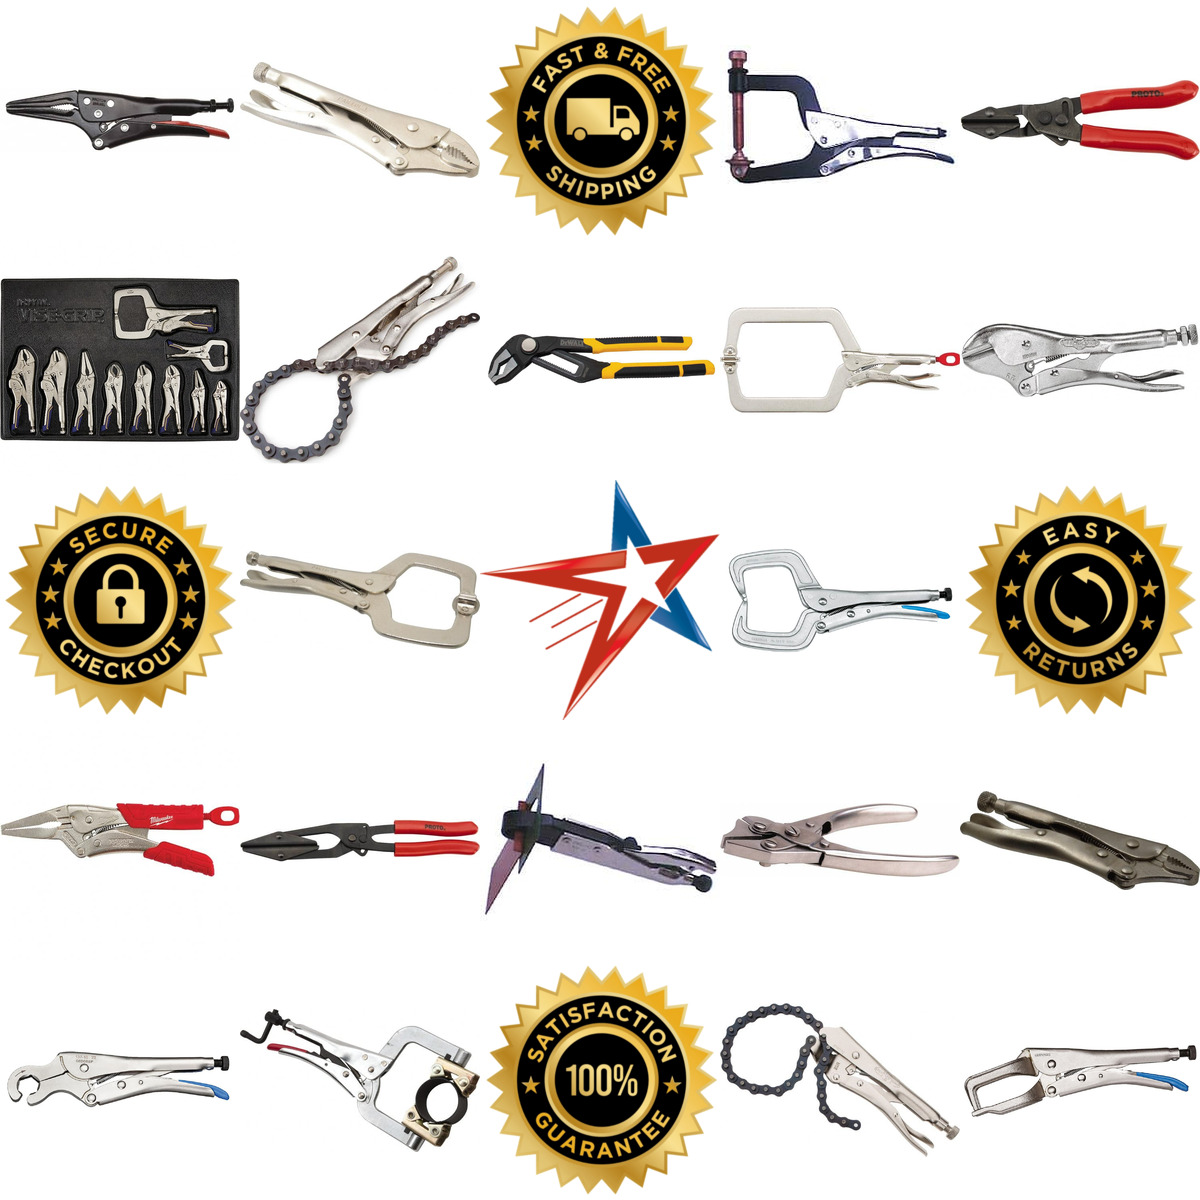 A selection of Locking Pliers products on GoVets